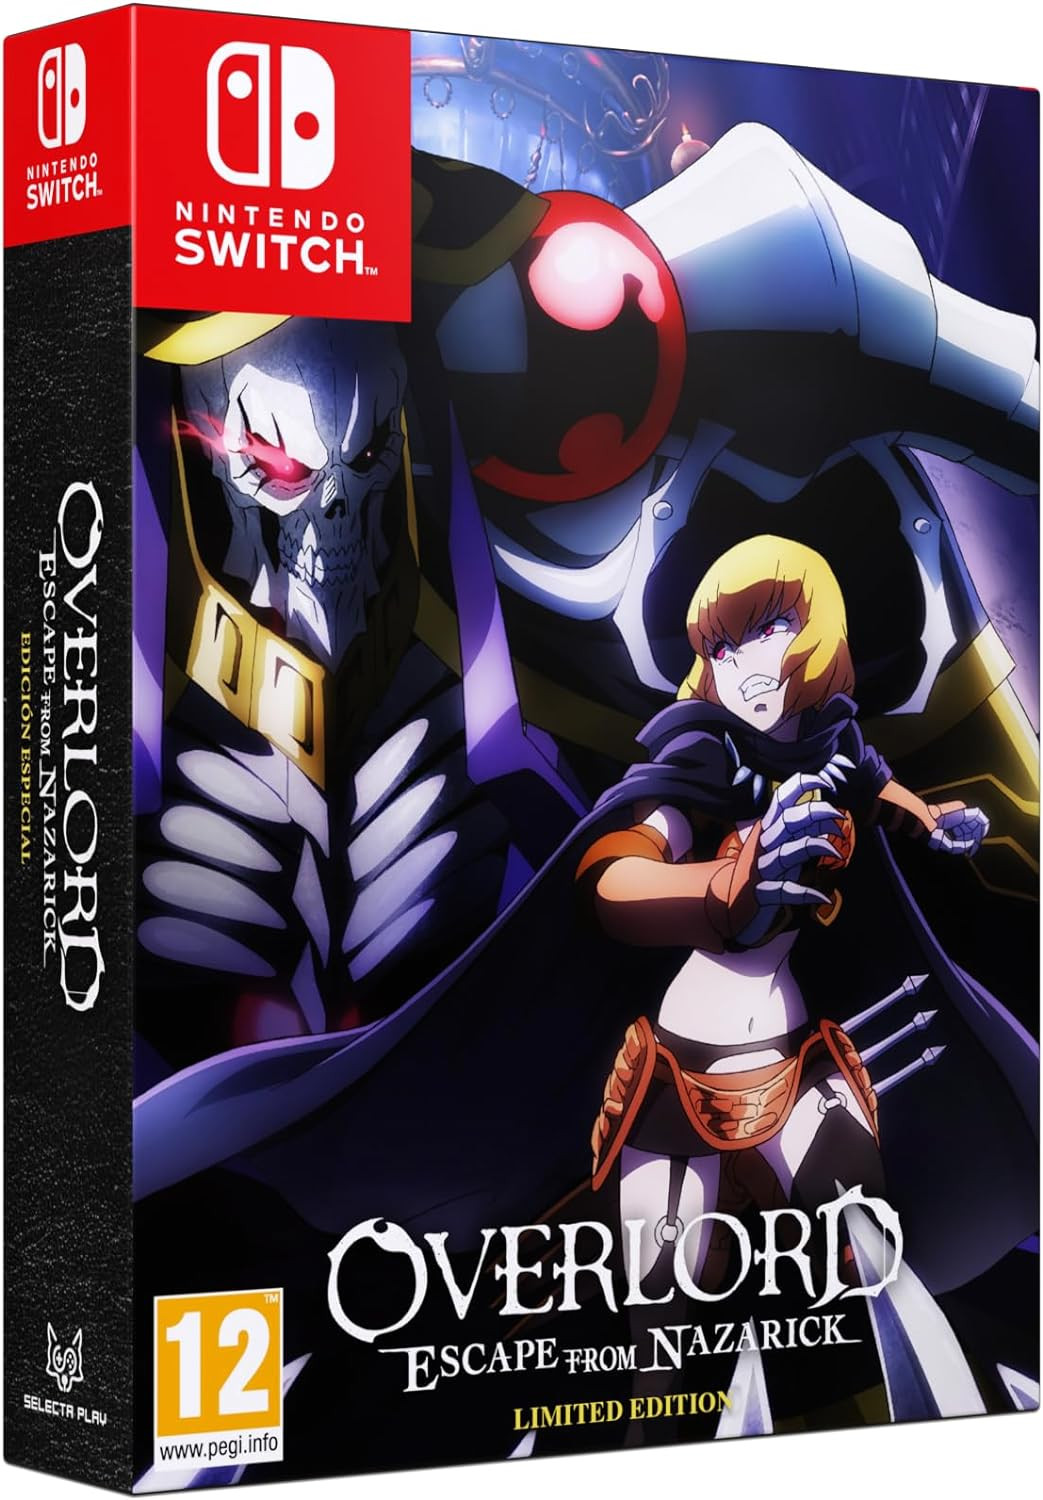 Overlord Escape From Nazarick Limited Edition - Nintendo Switch